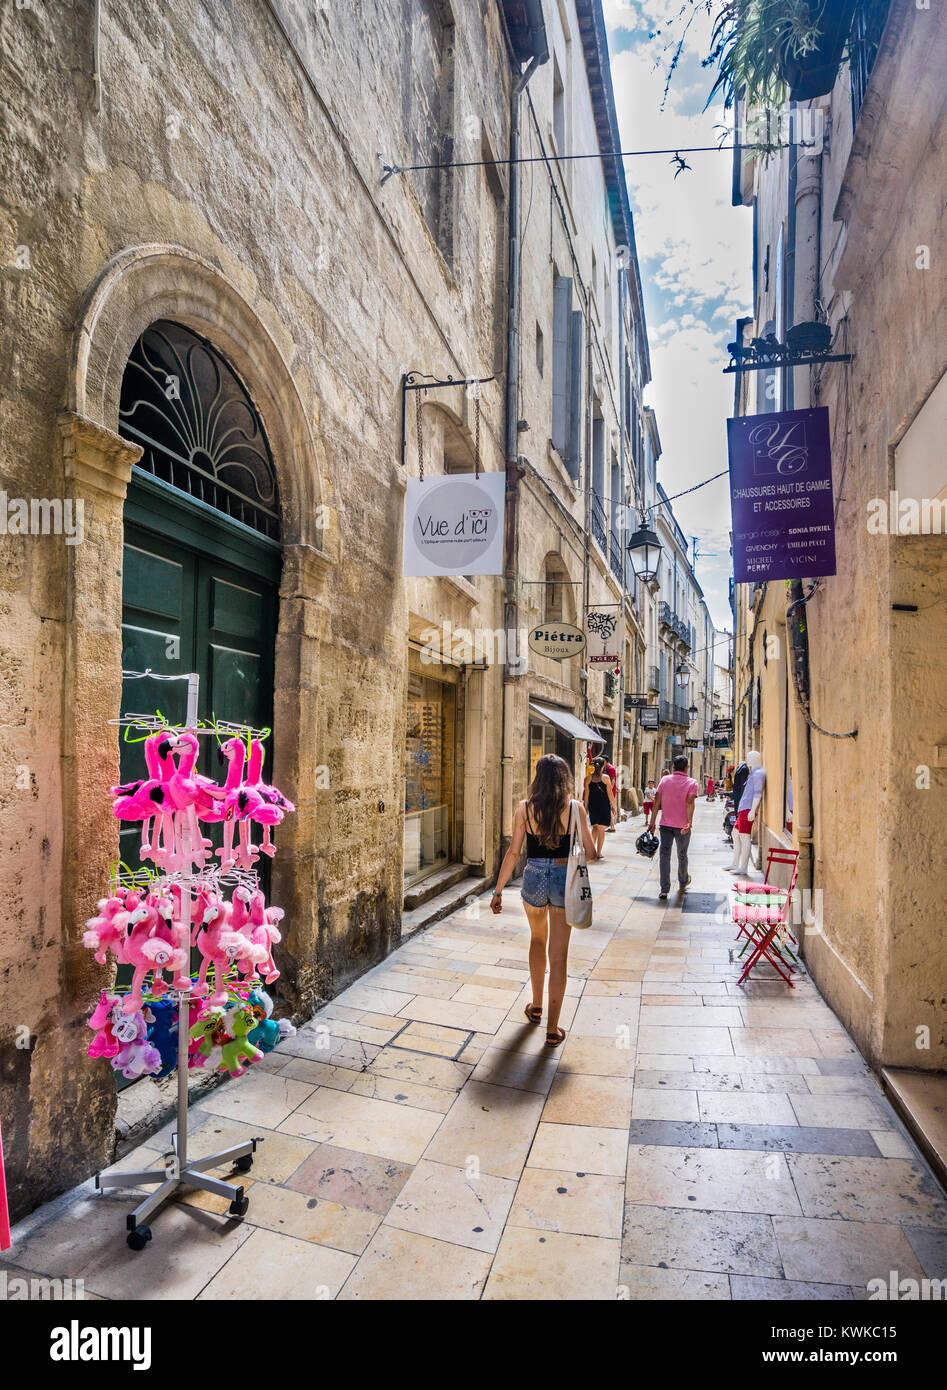 France, Hérault department, Montpellier, Rue de l'Ancien Courrier, narrow street in the historic center of the city Stock Photo